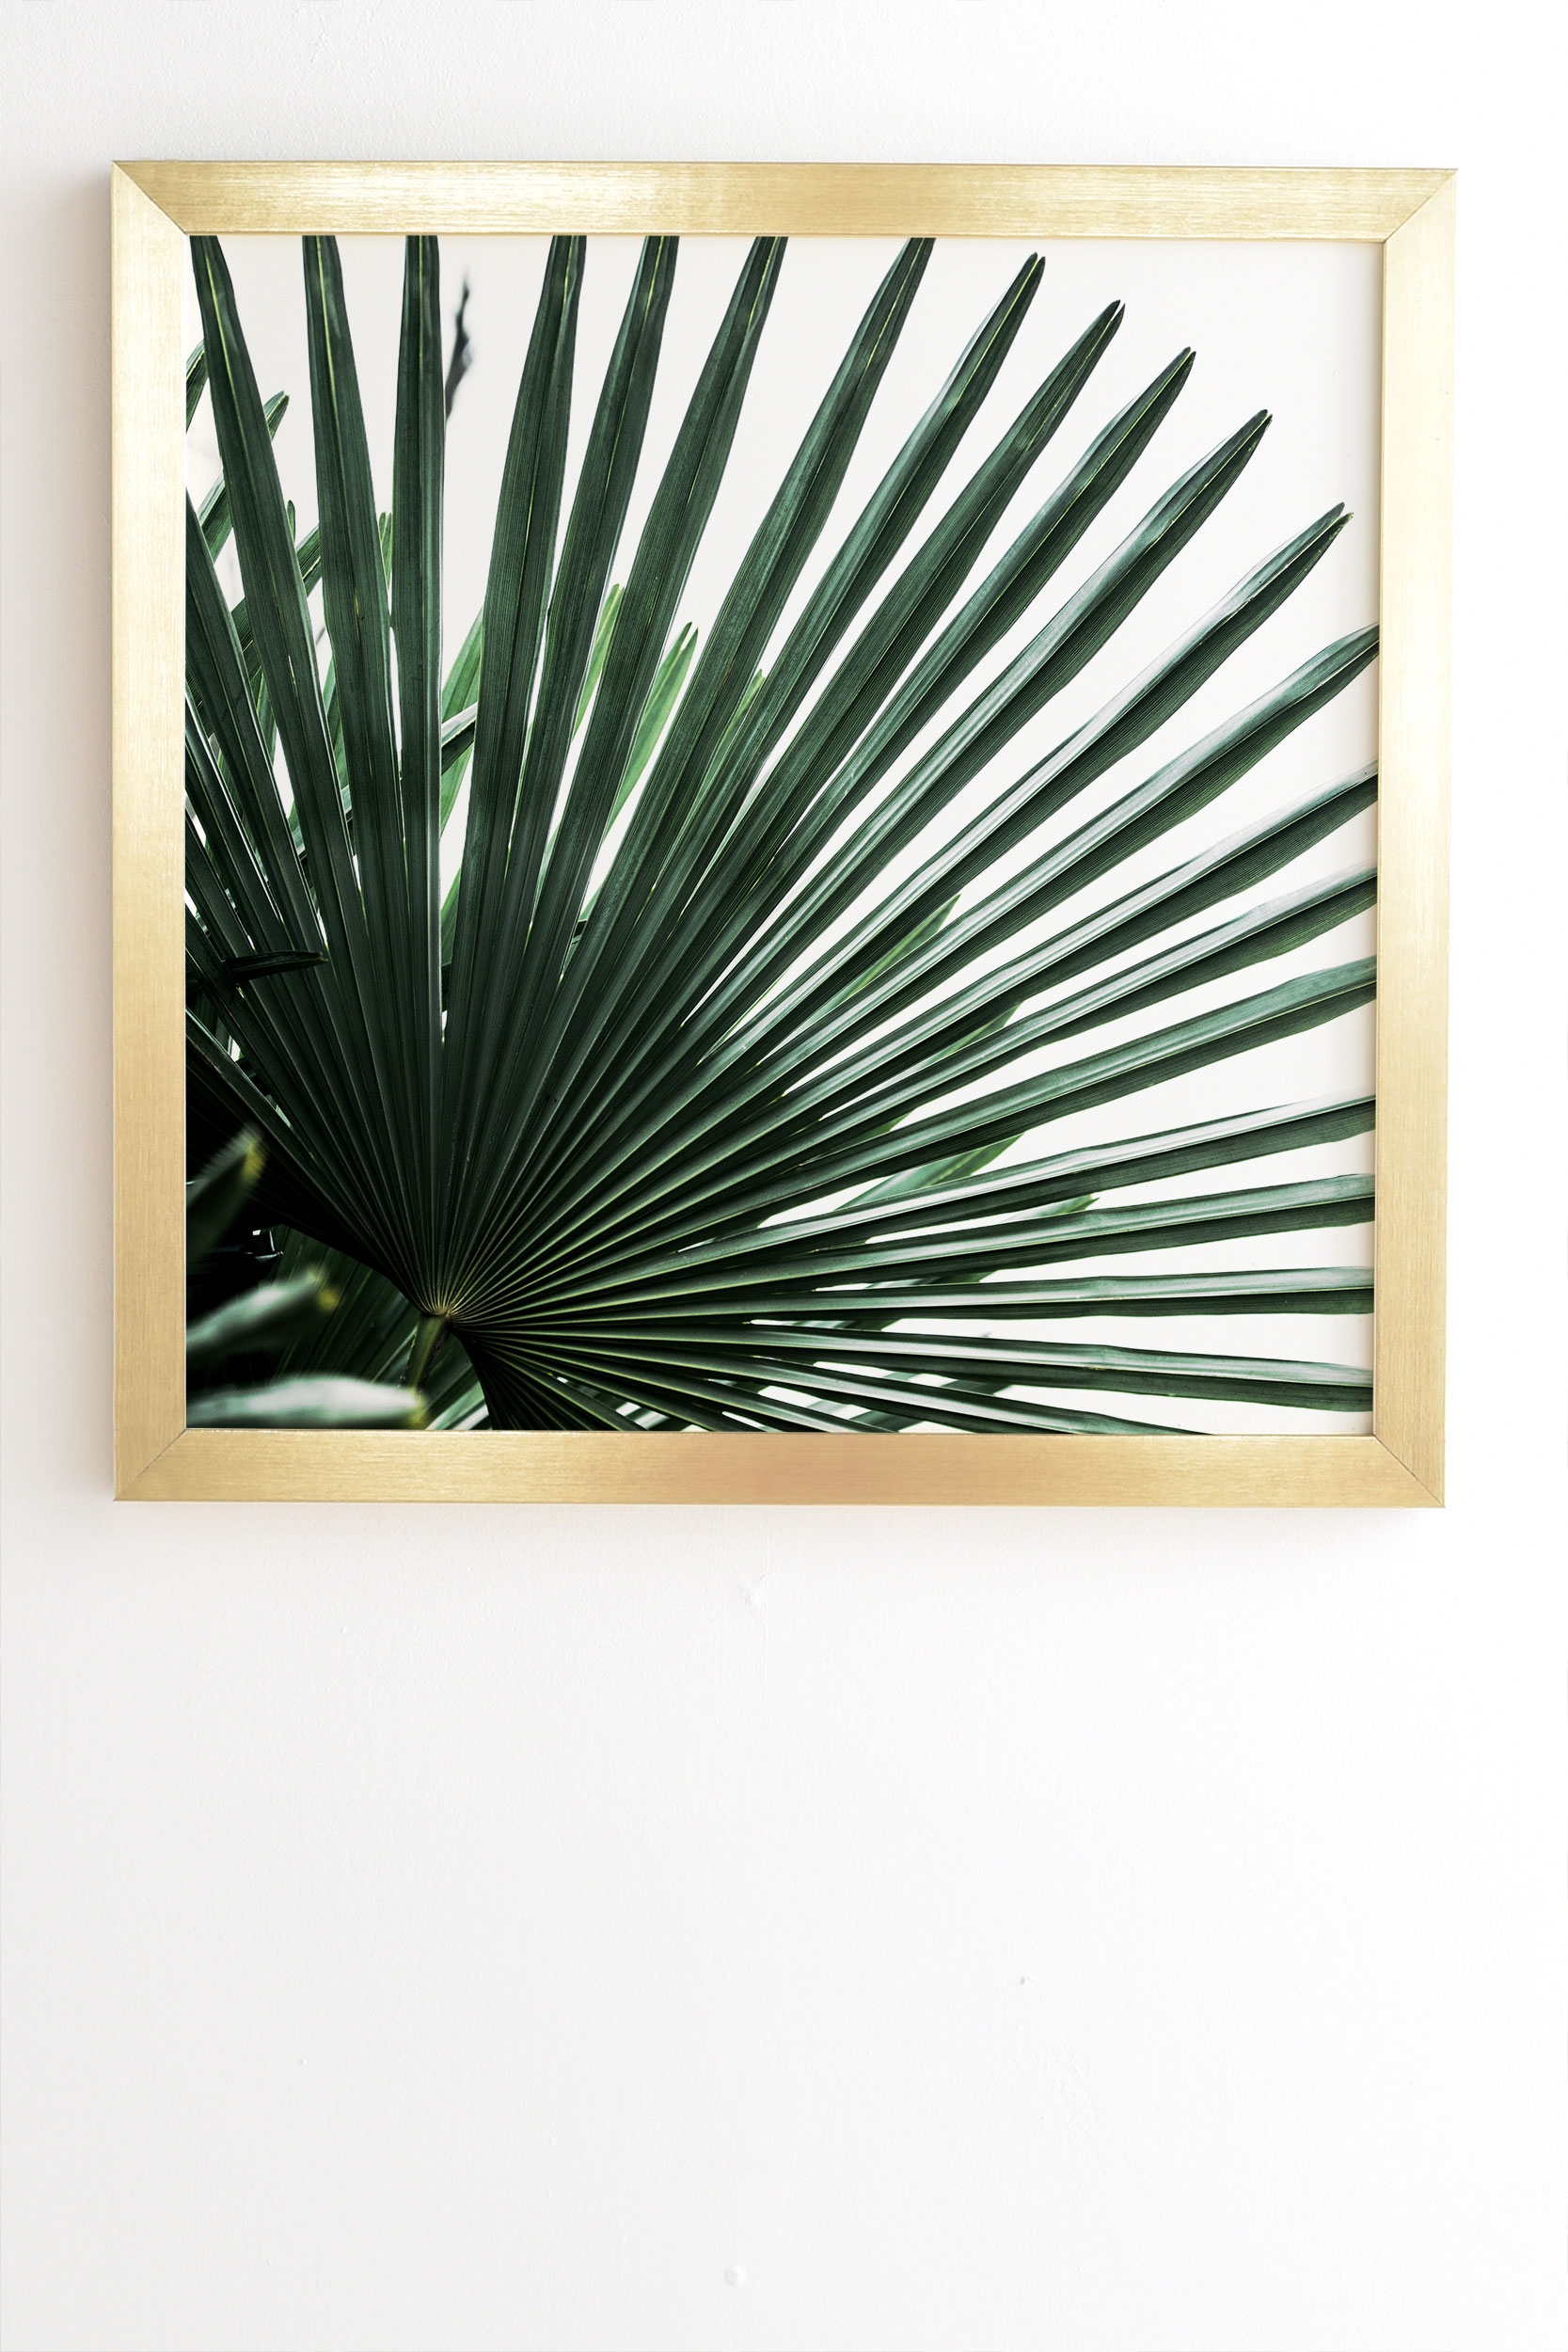 Palm Leaves 13 by Mareike Boehmer - Framed Wall Art Basic Gold 11" x 13" - Image 1